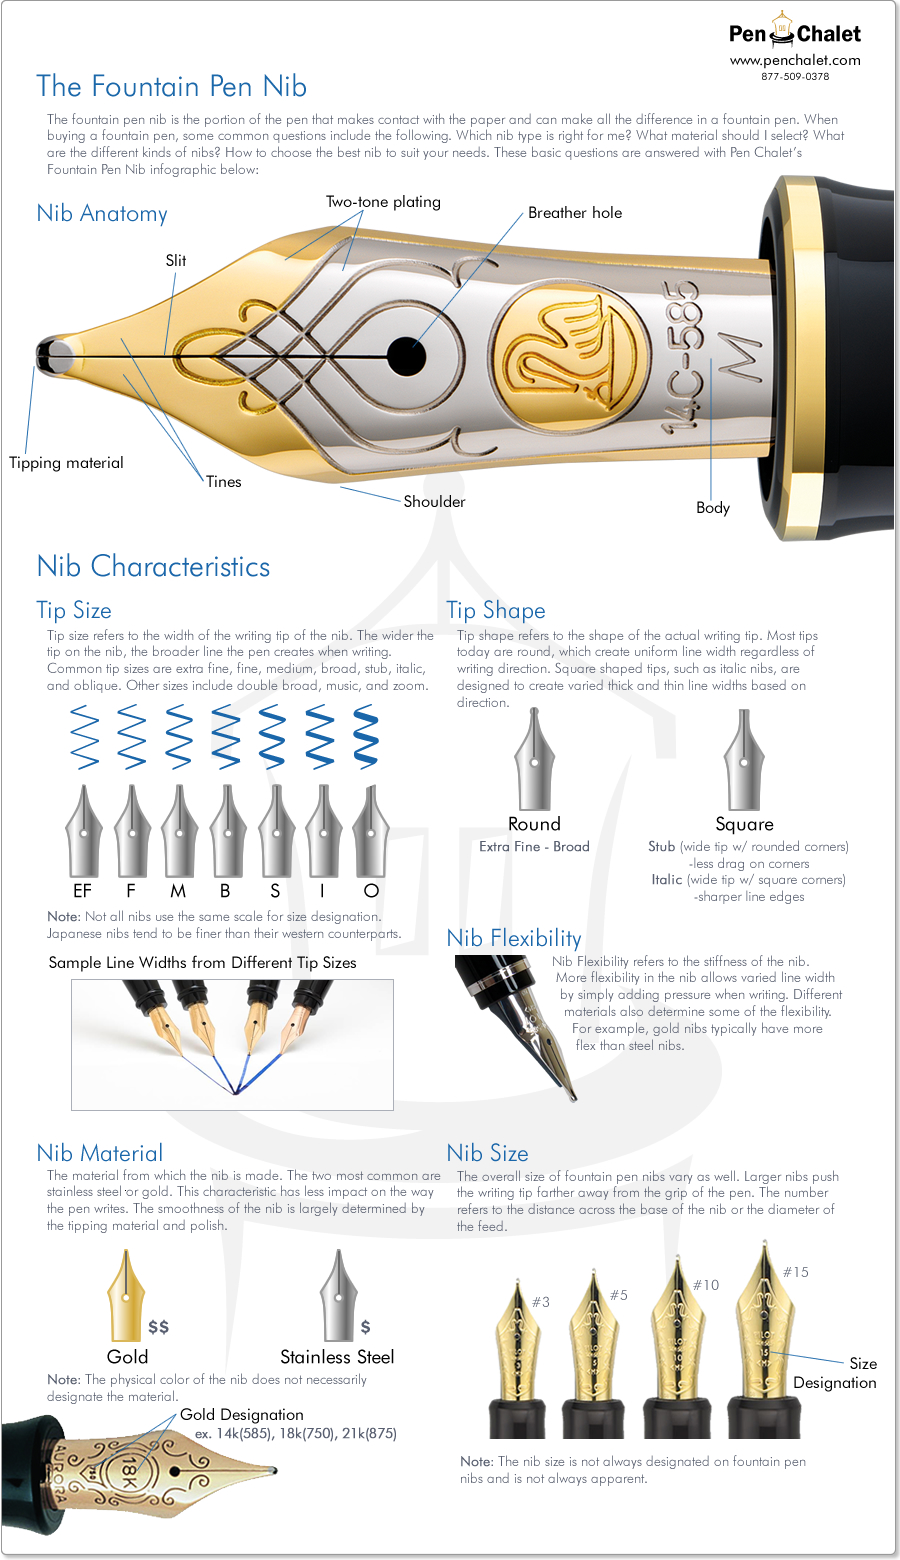 What is a Fountain Pen?